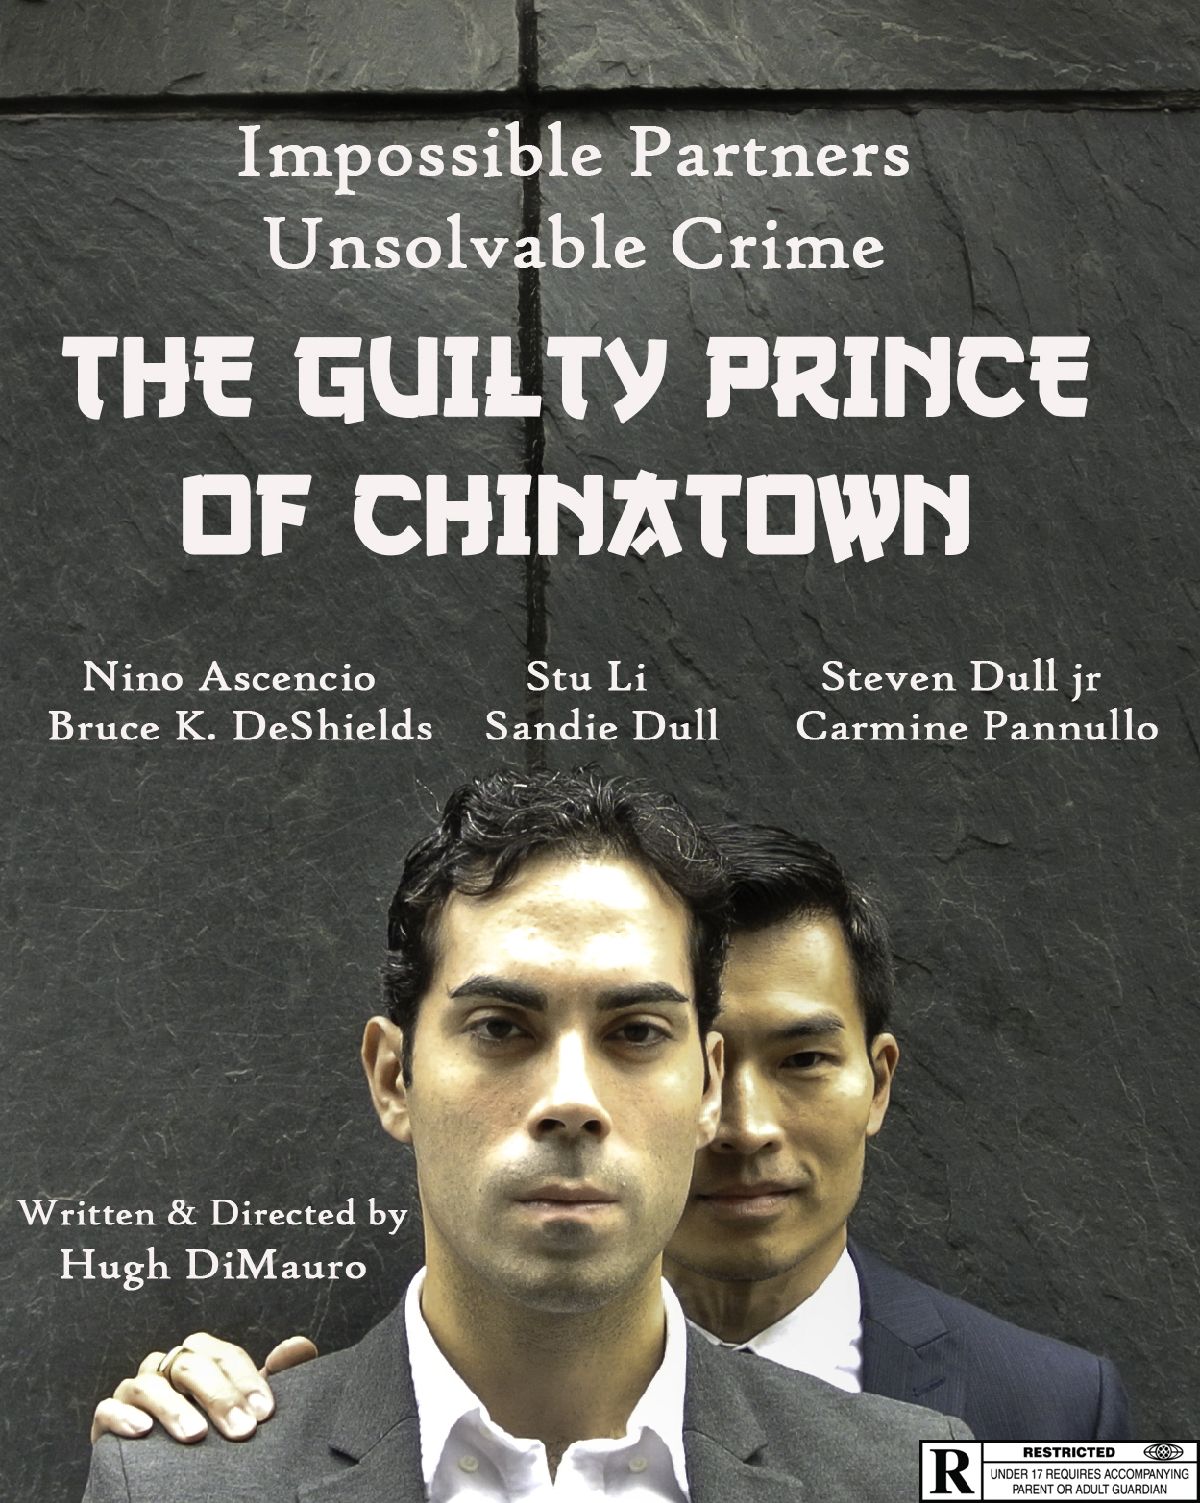 The Guilty Prince of Chinatown